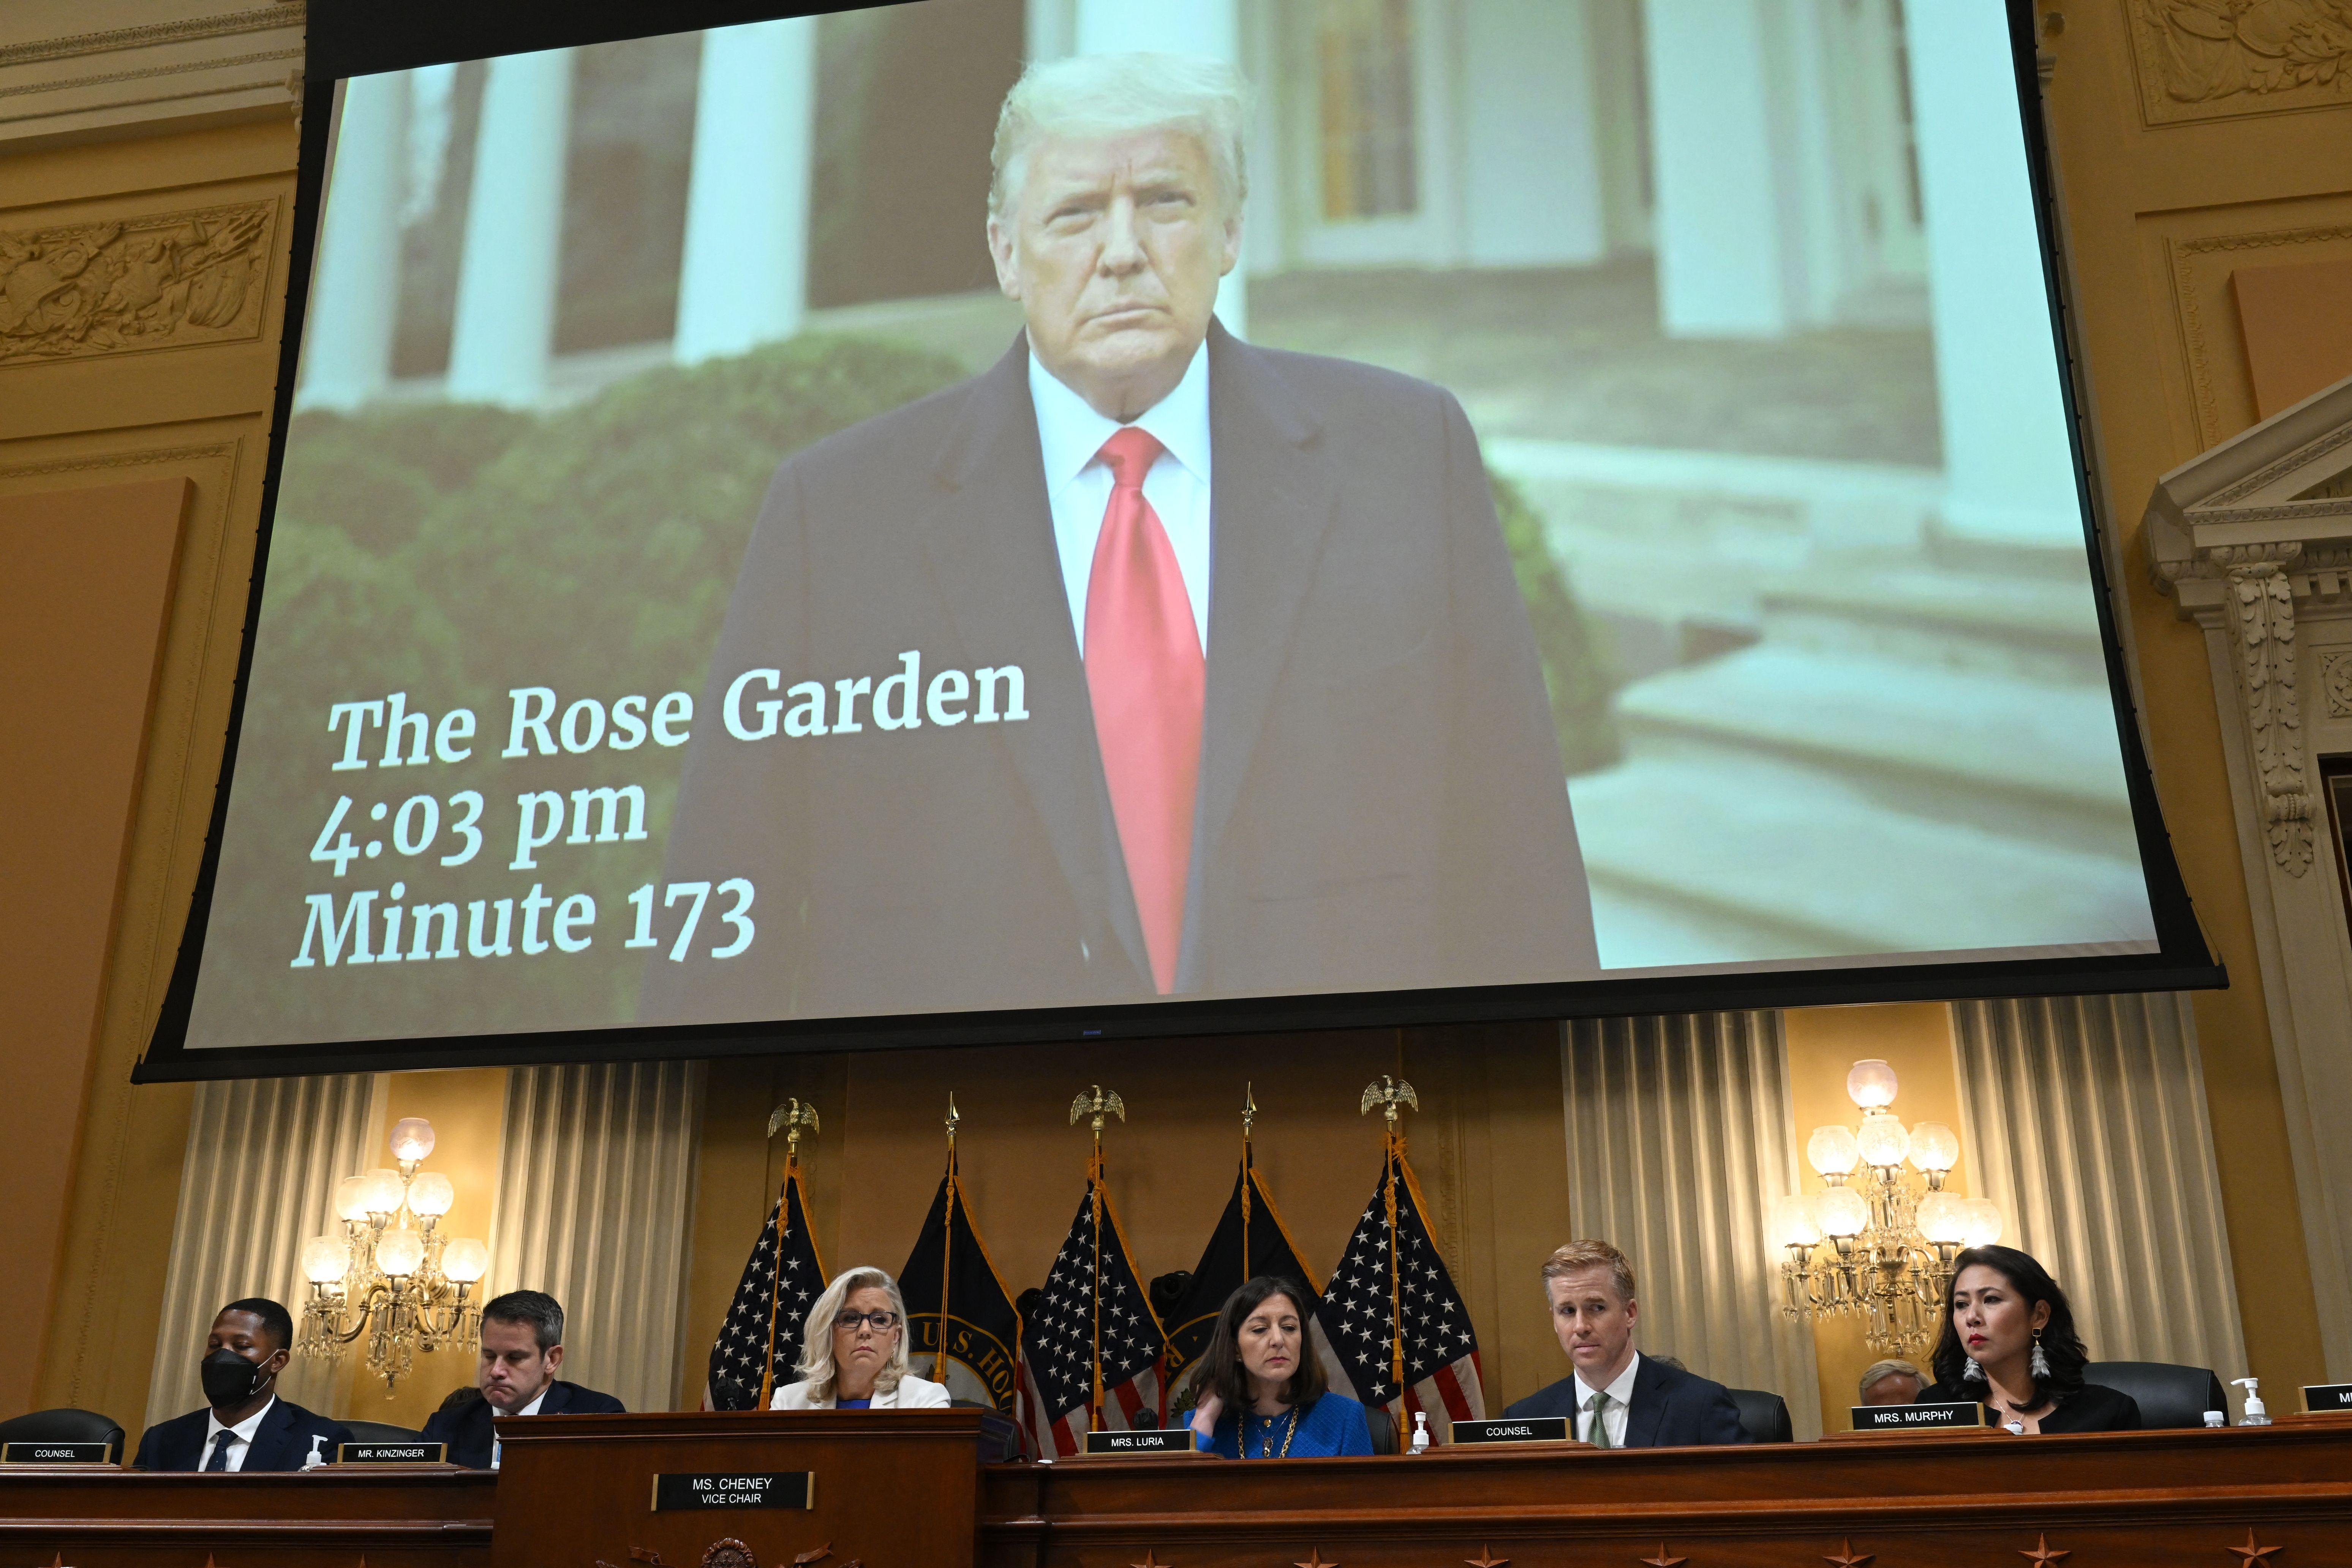 Trump looks stone-faced at 4:03 p.m. on Jan. 6 in the Rose Garden.